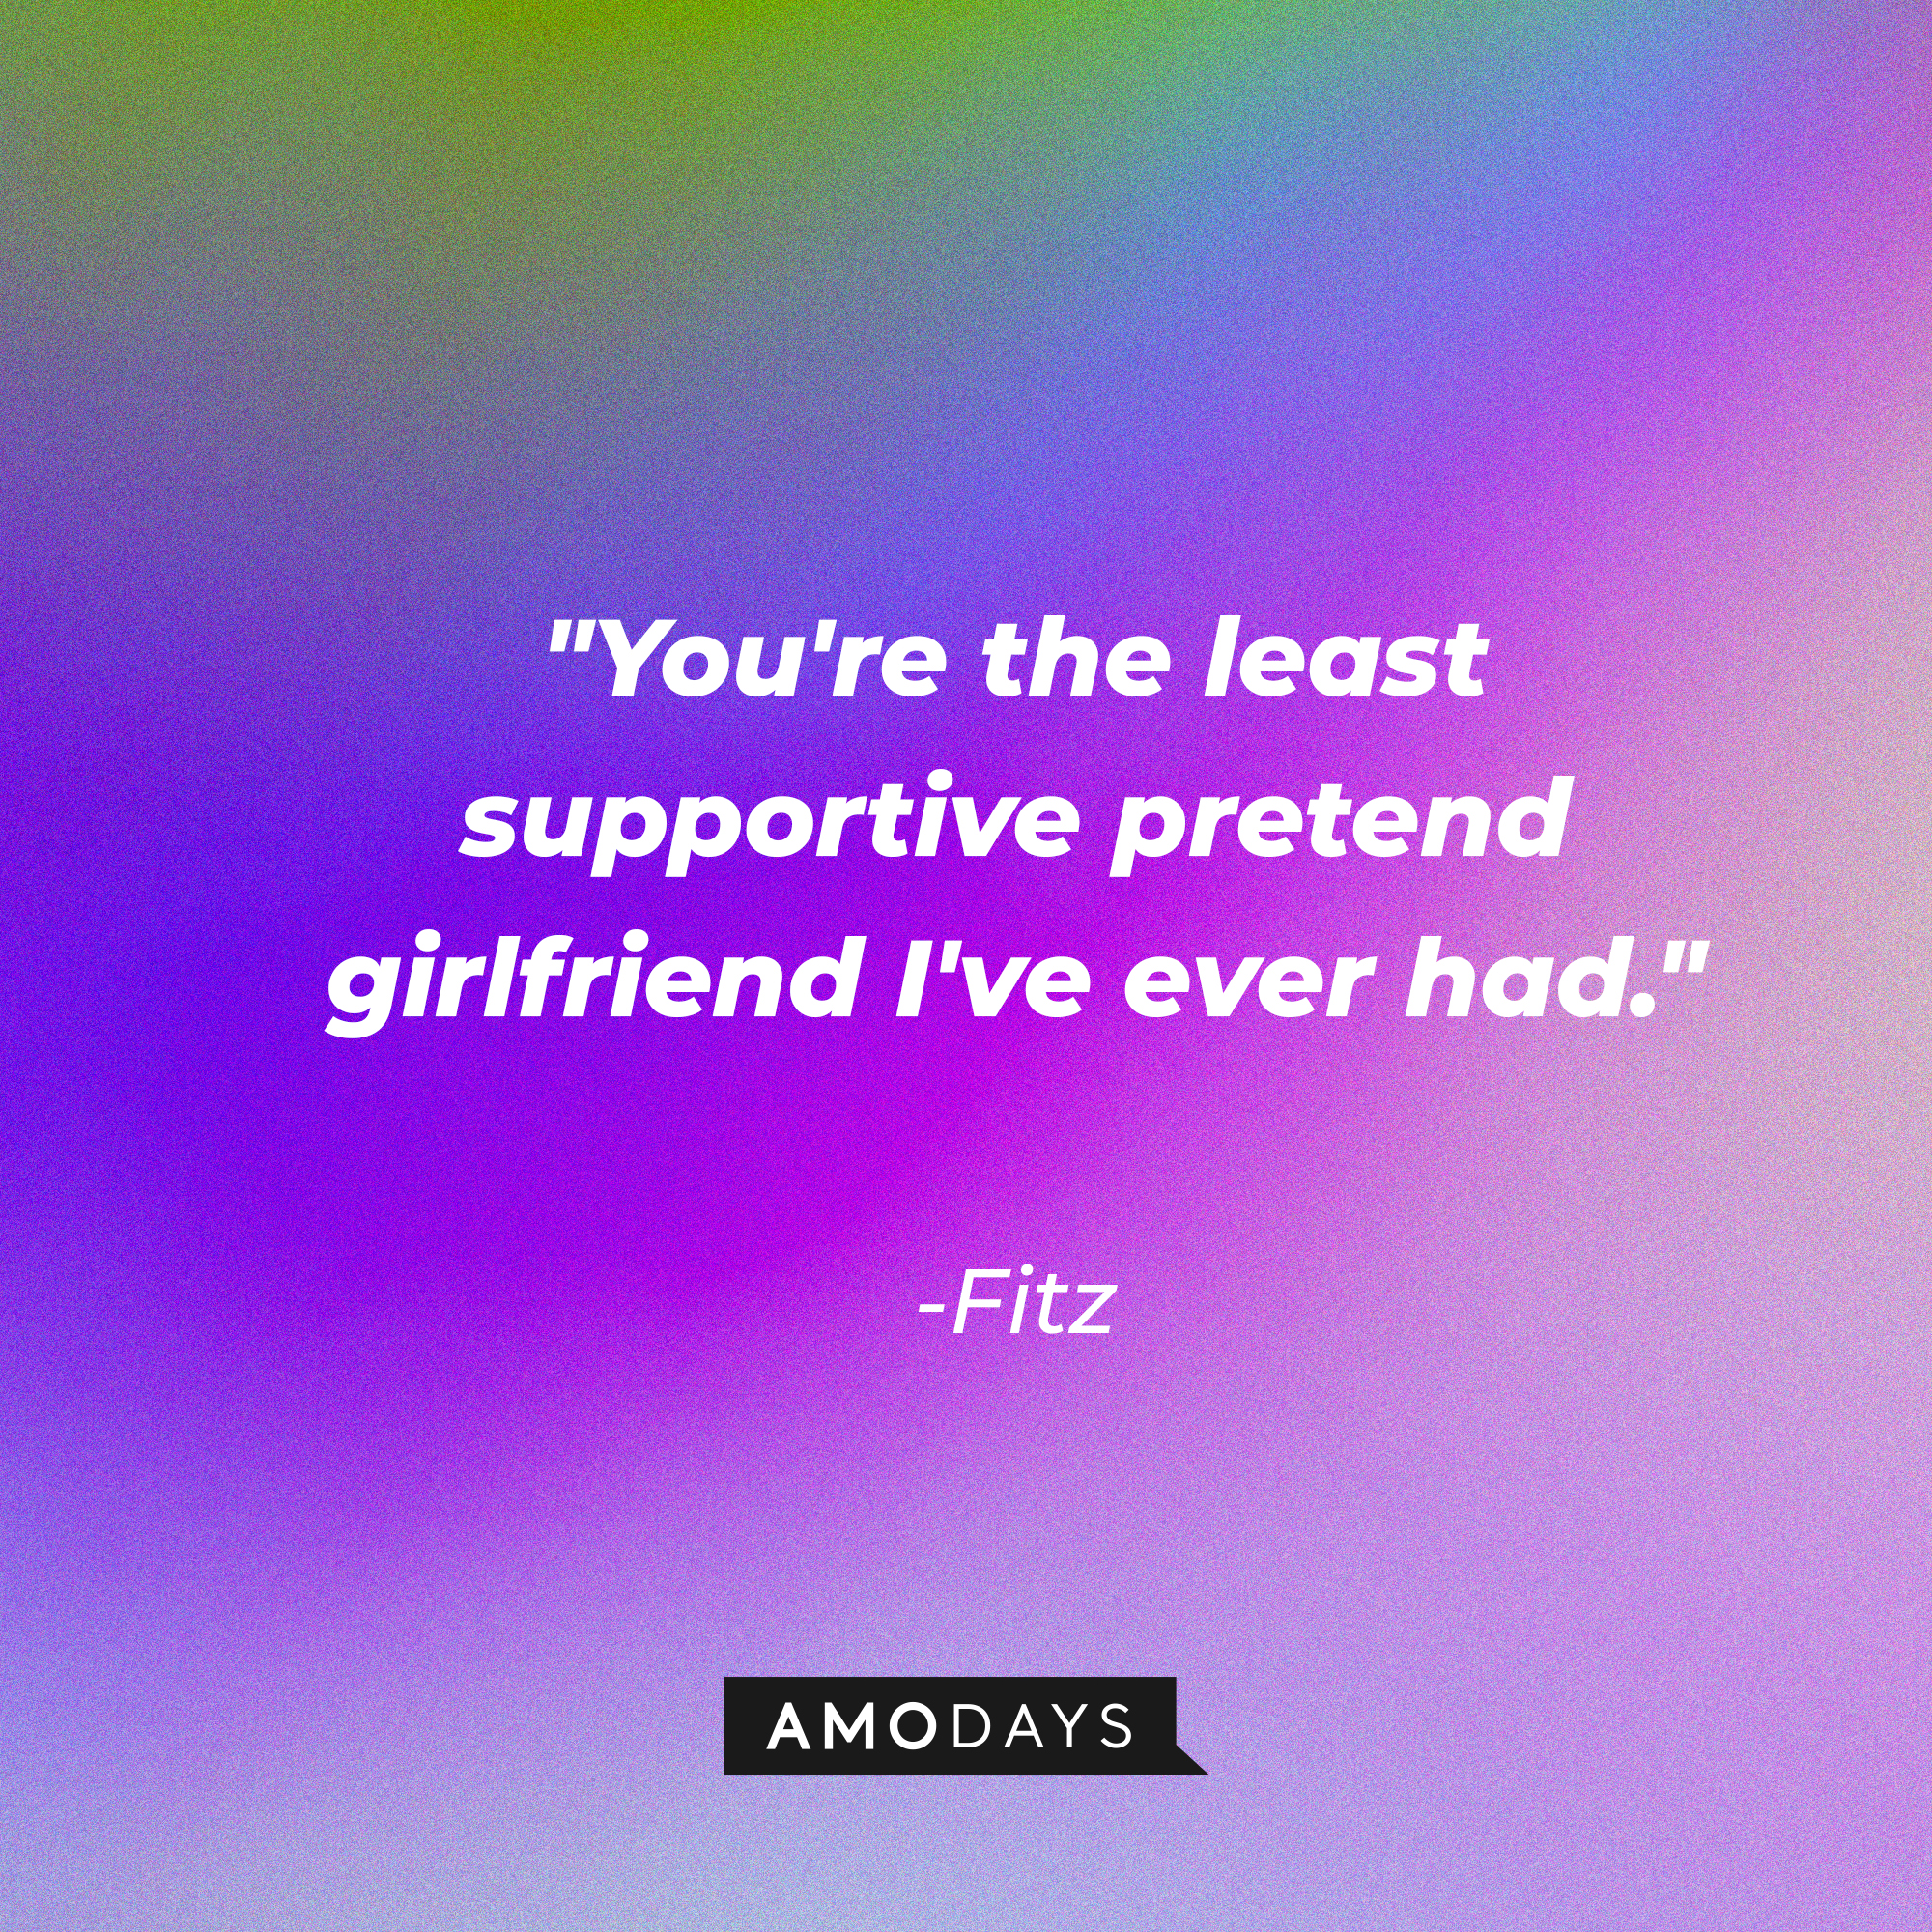 Fitz's quote: "You're the least supportive pretend girlfriend I've ever had." | Source: Amodays